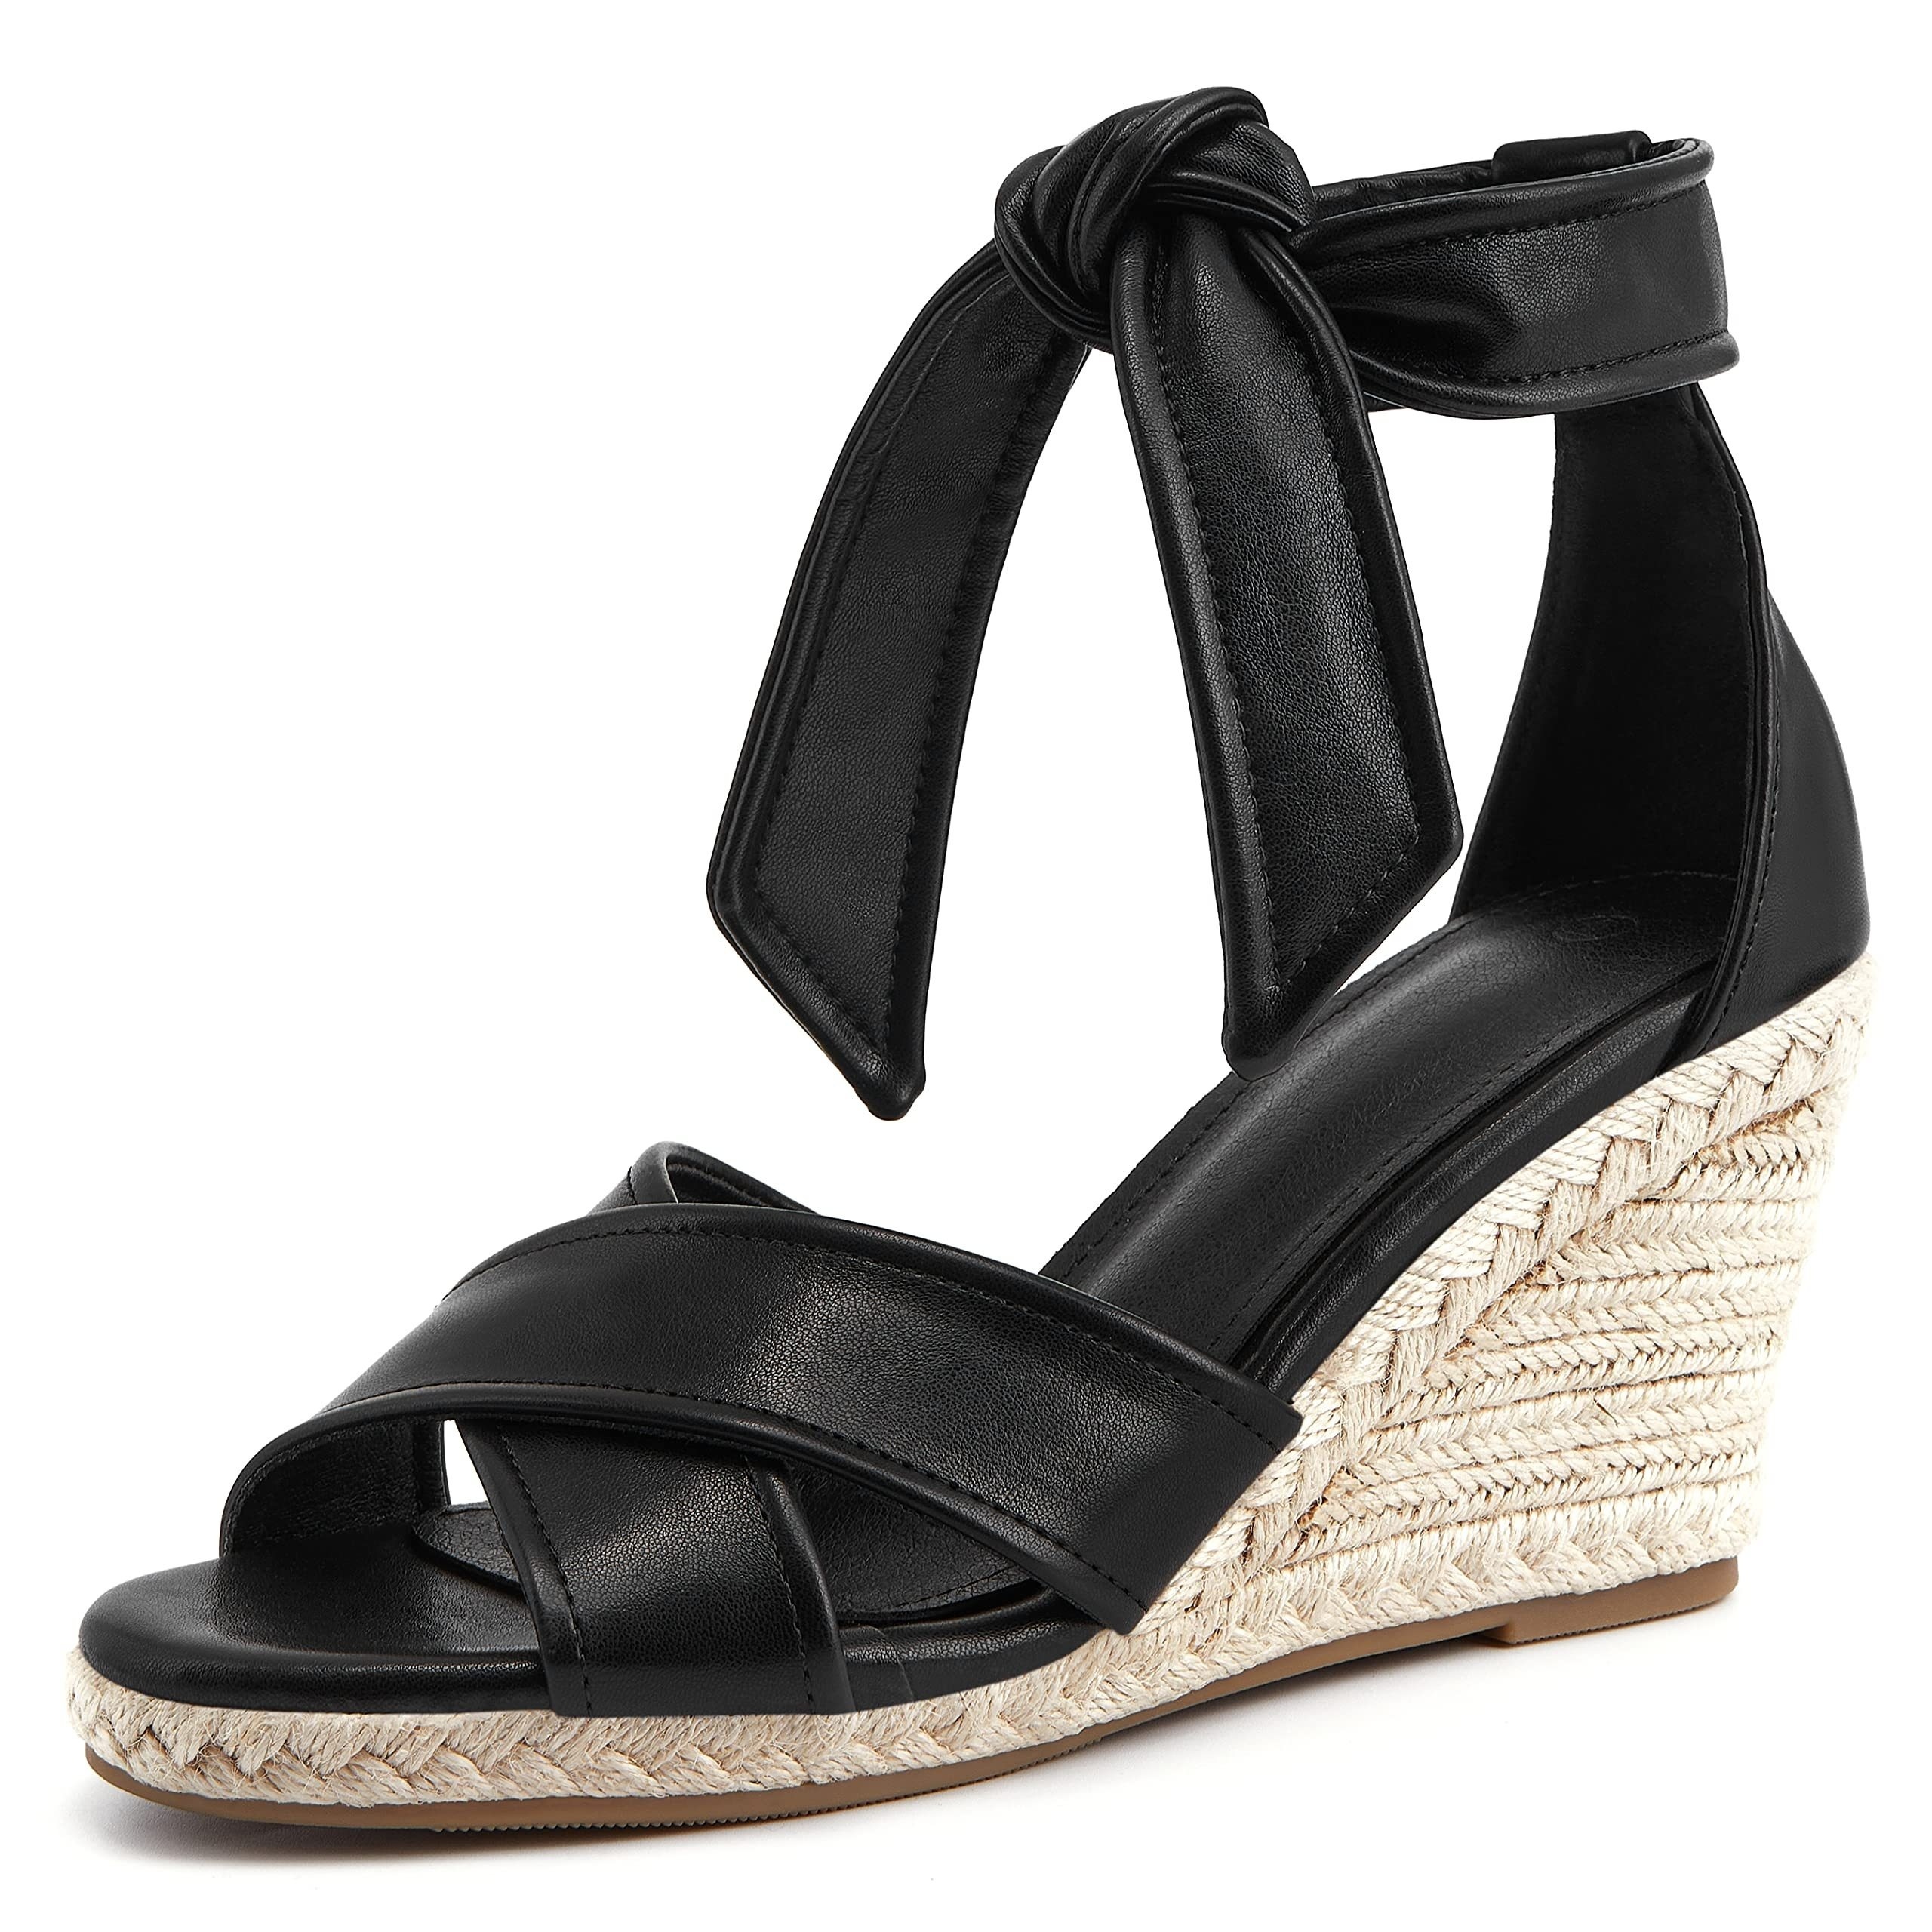 

Women's Round Open Toe Ankle Tie Espadrille Wedge Sandals, Artificial Leather, Stylish Thick Sole Dress Shoes